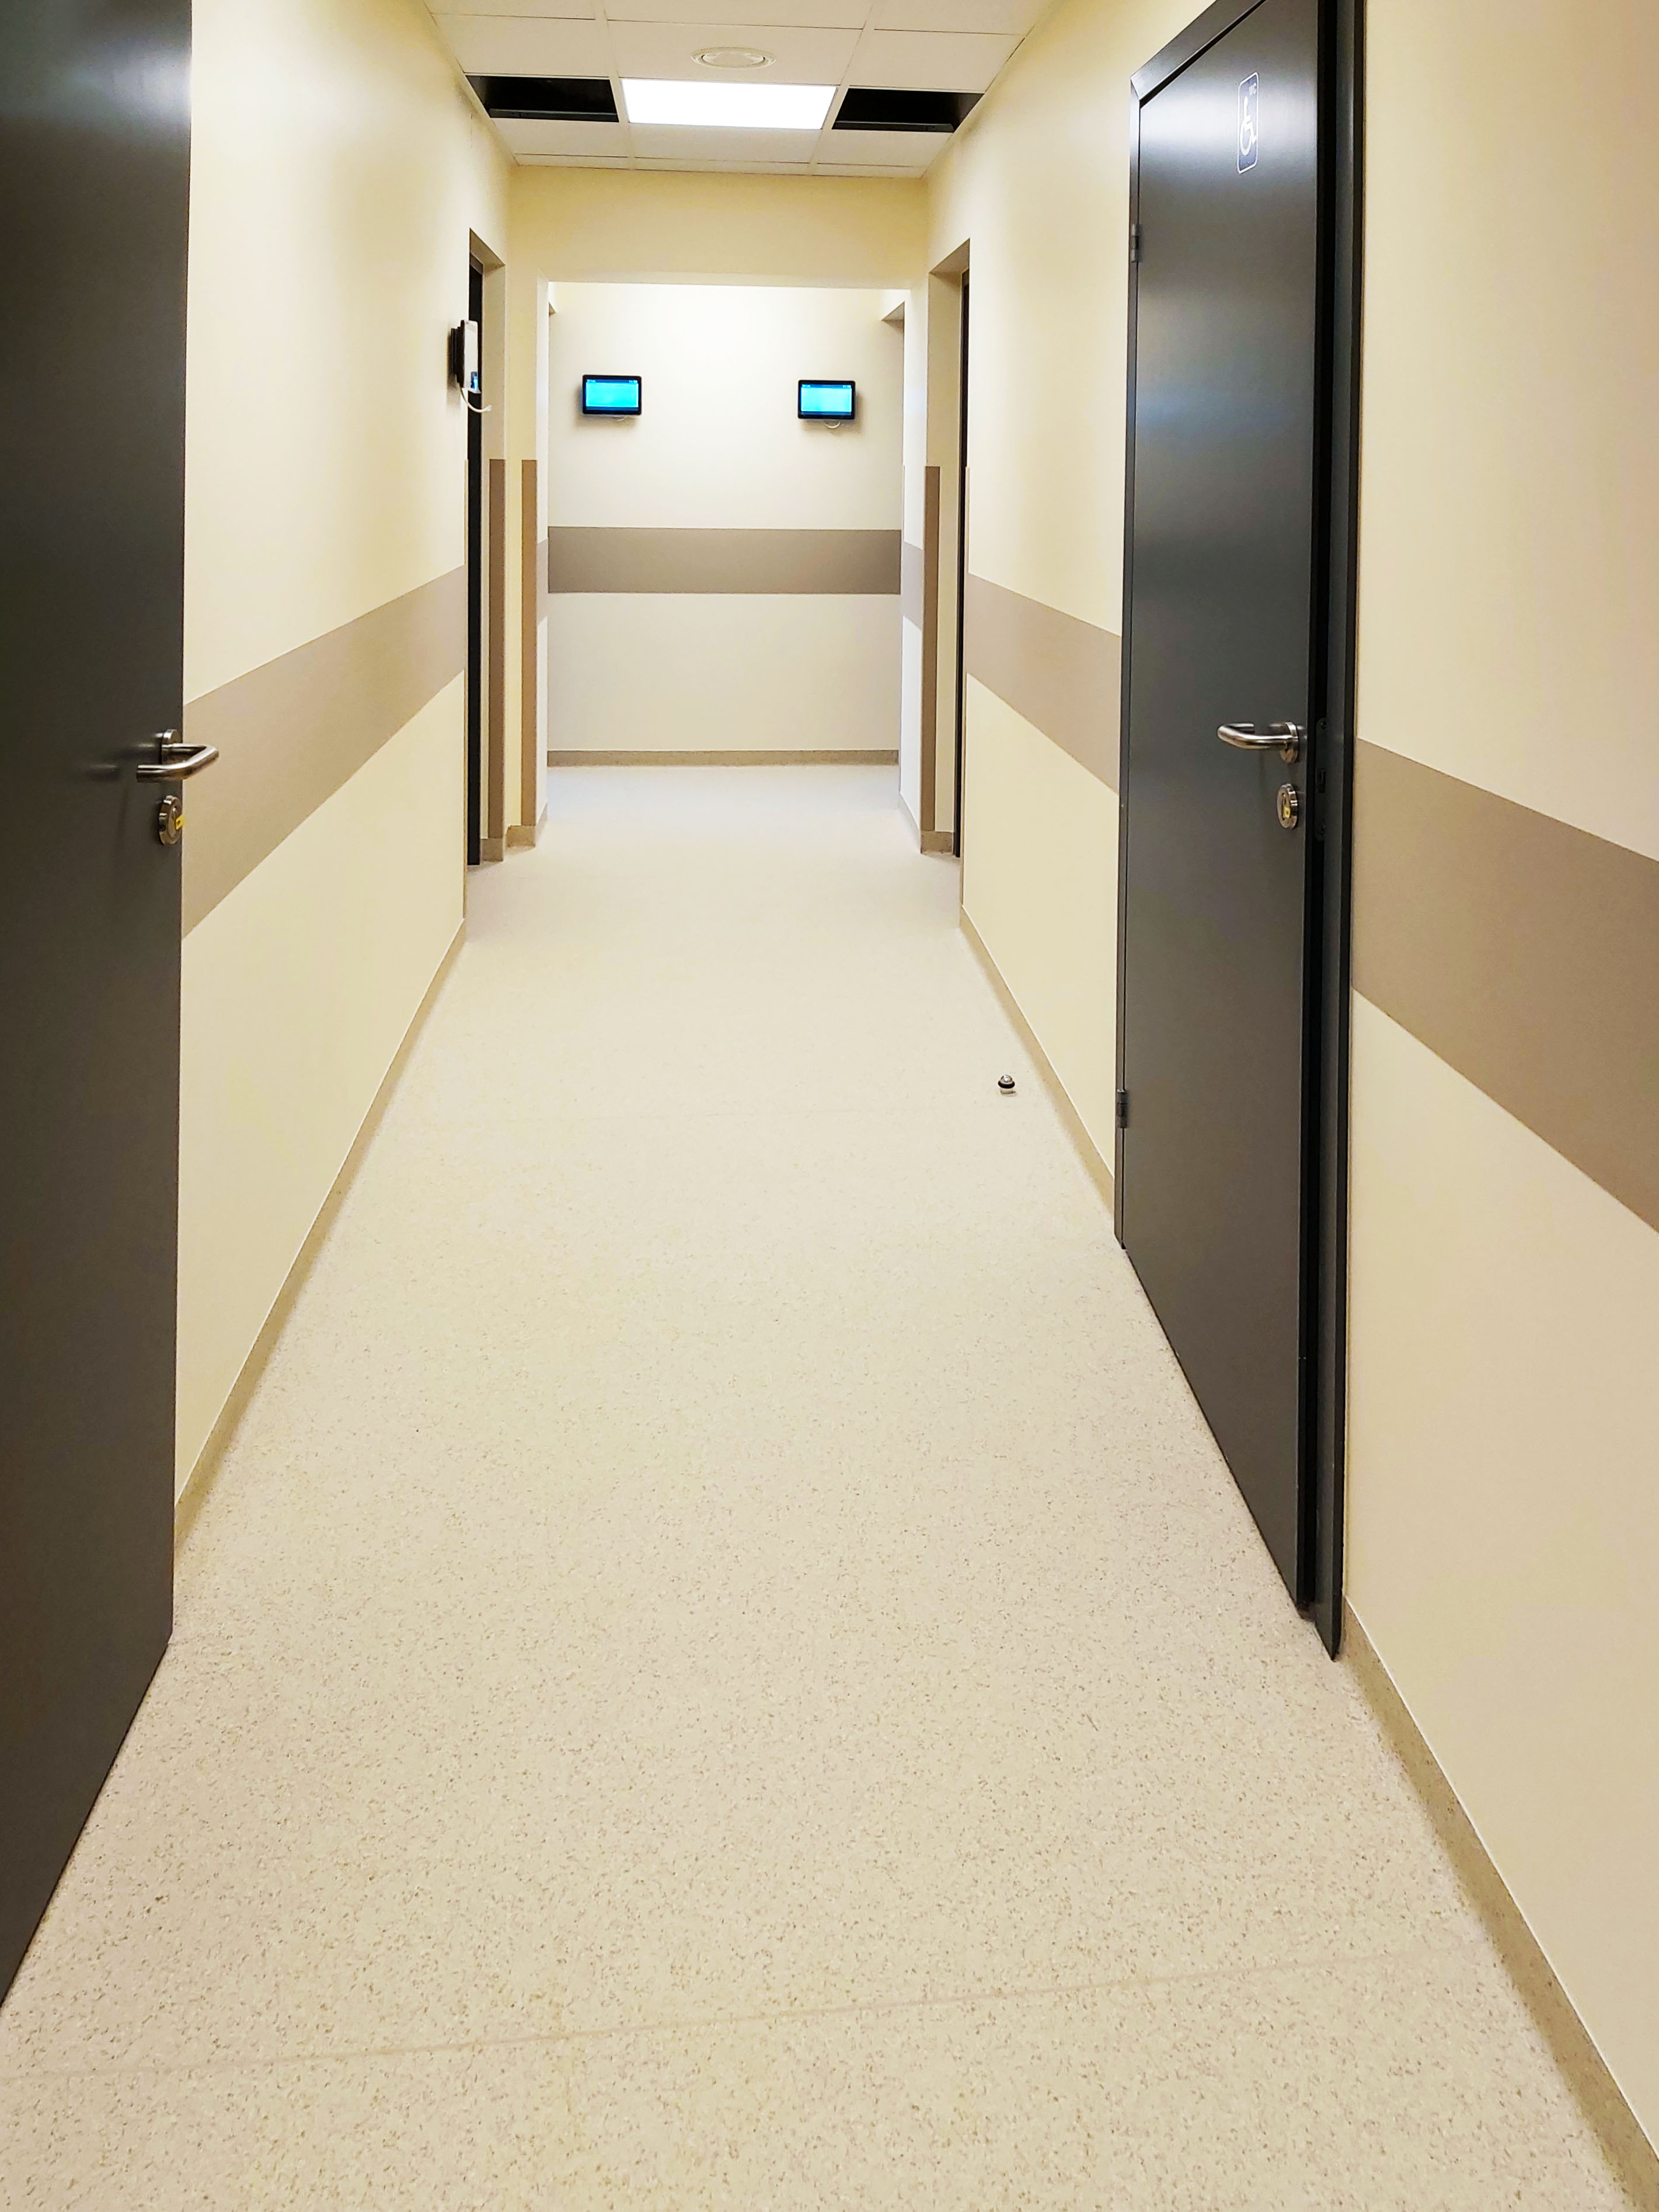 Supply and installation of vinyl barriers to protect walls and corners in medical facility